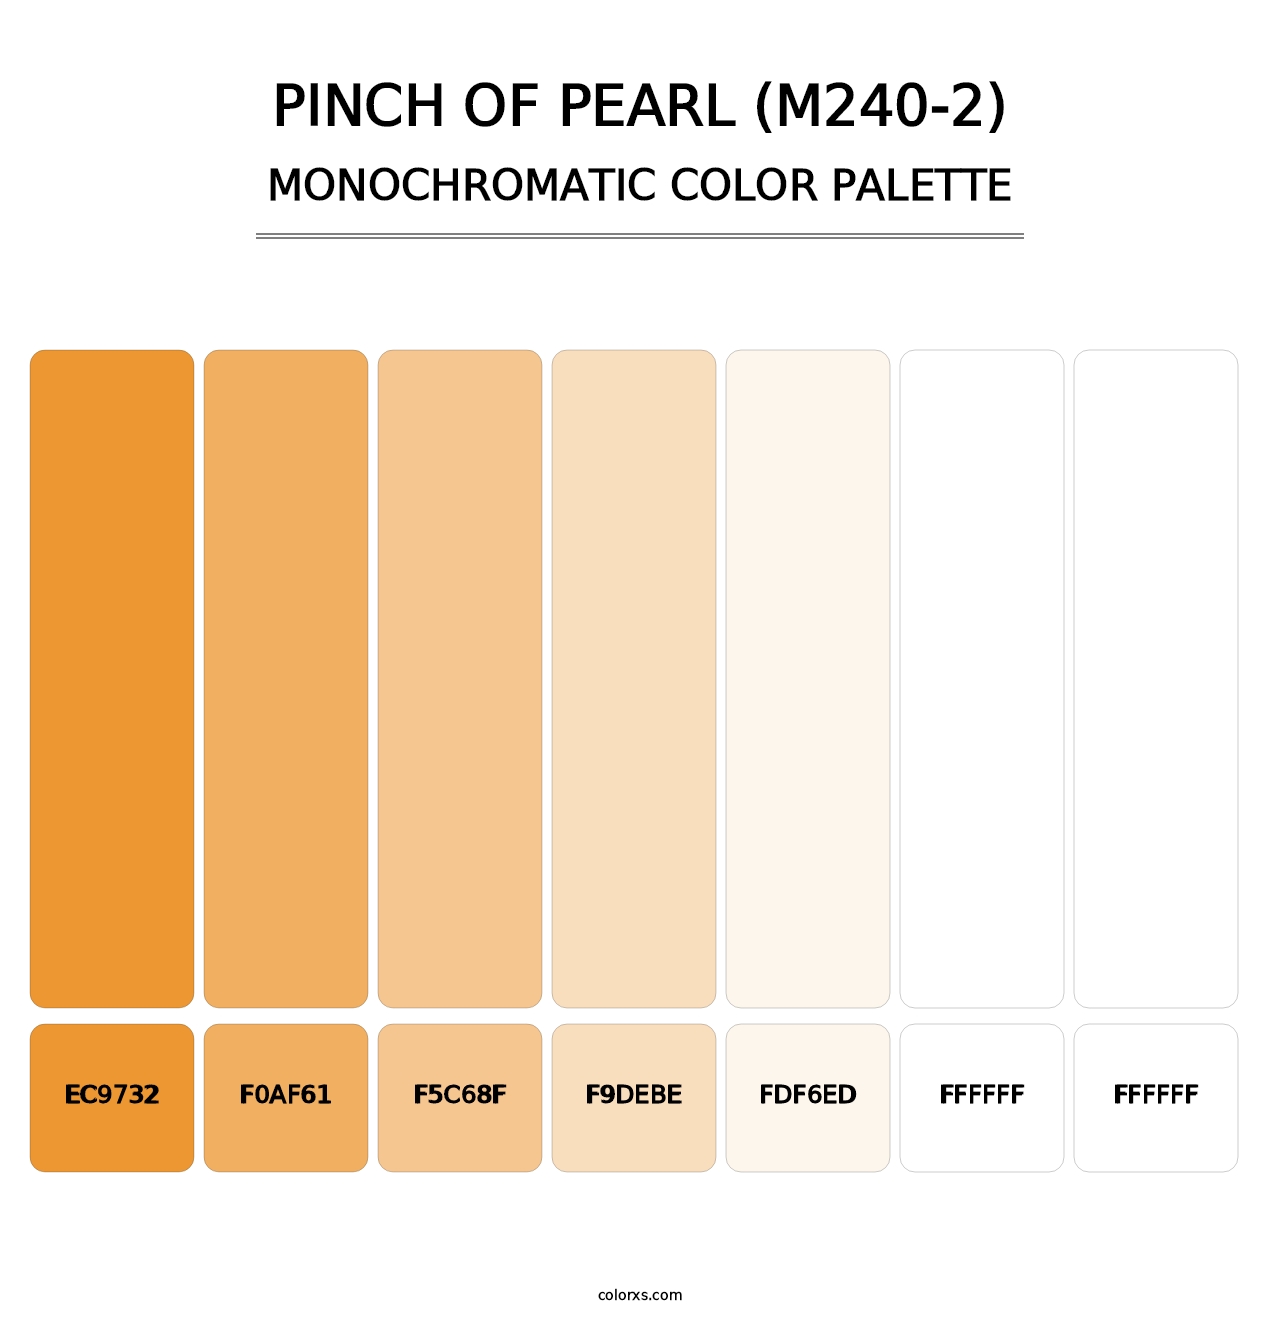 Pinch Of Pearl (M240-2) - Monochromatic Color Palette